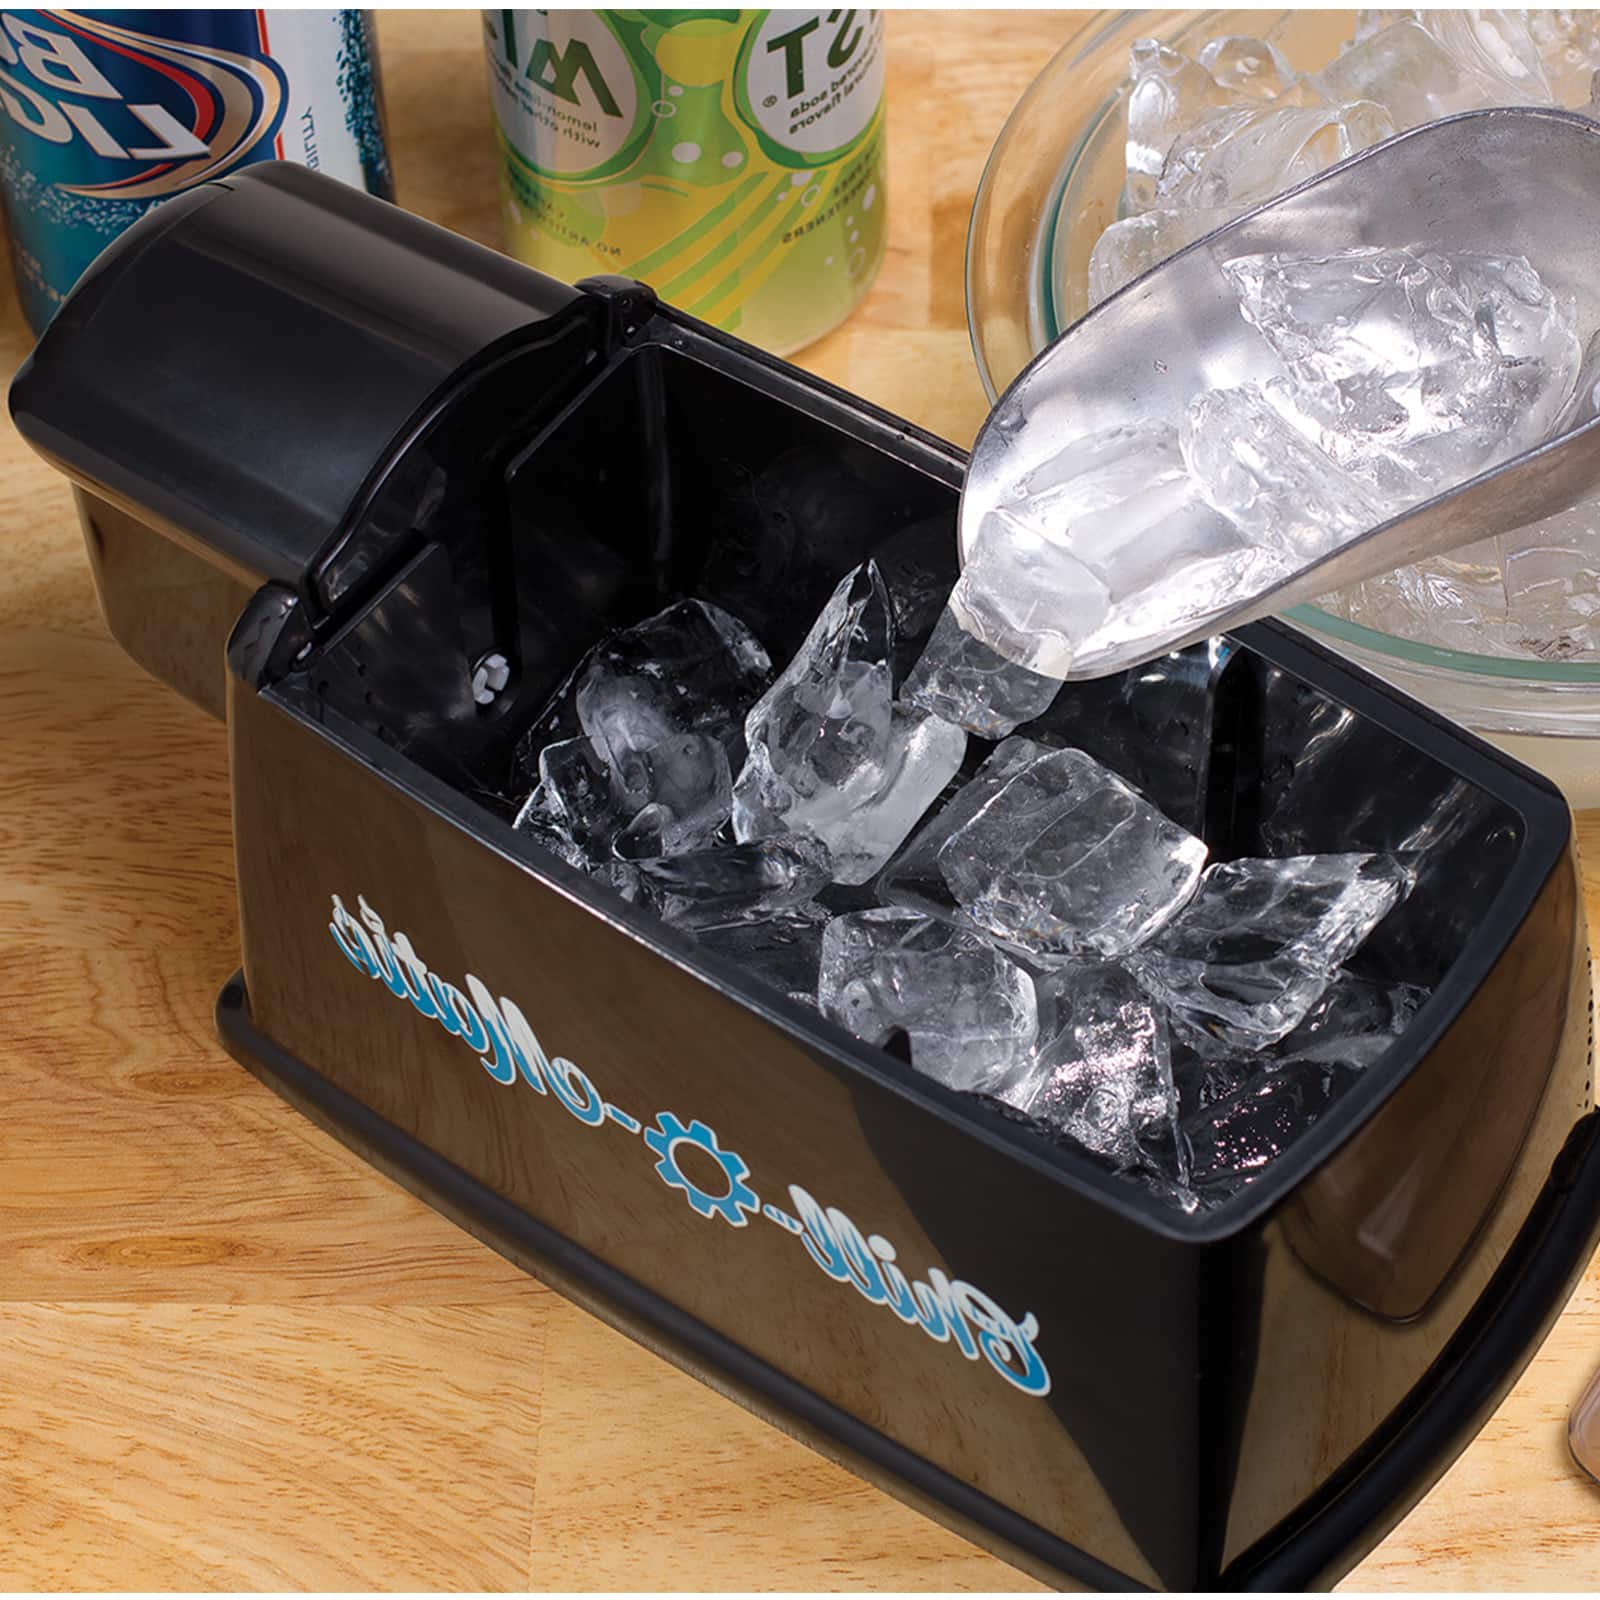 Chill-O-Matic. Get ice cold drinks in 60 seconds with ChillOMatic